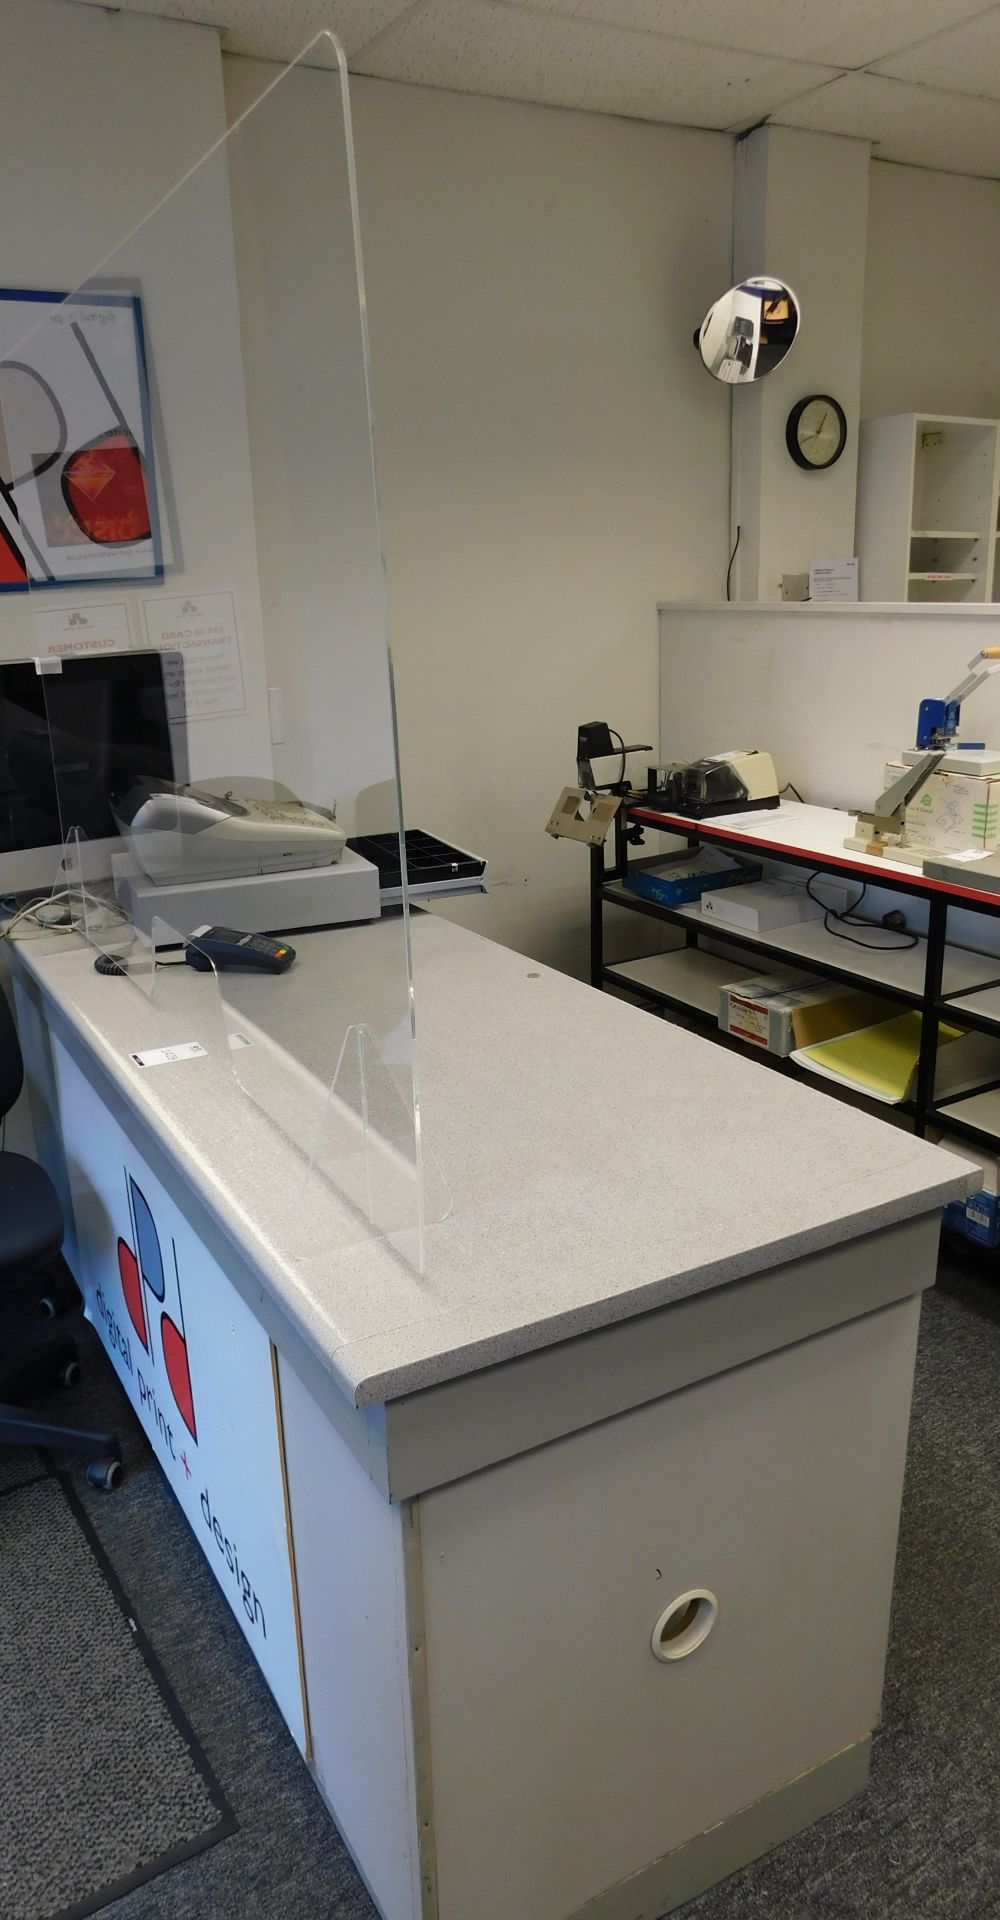 Laminated Counter with Anti-COVID Perspex Screen (Located Watford - See General Notes for More